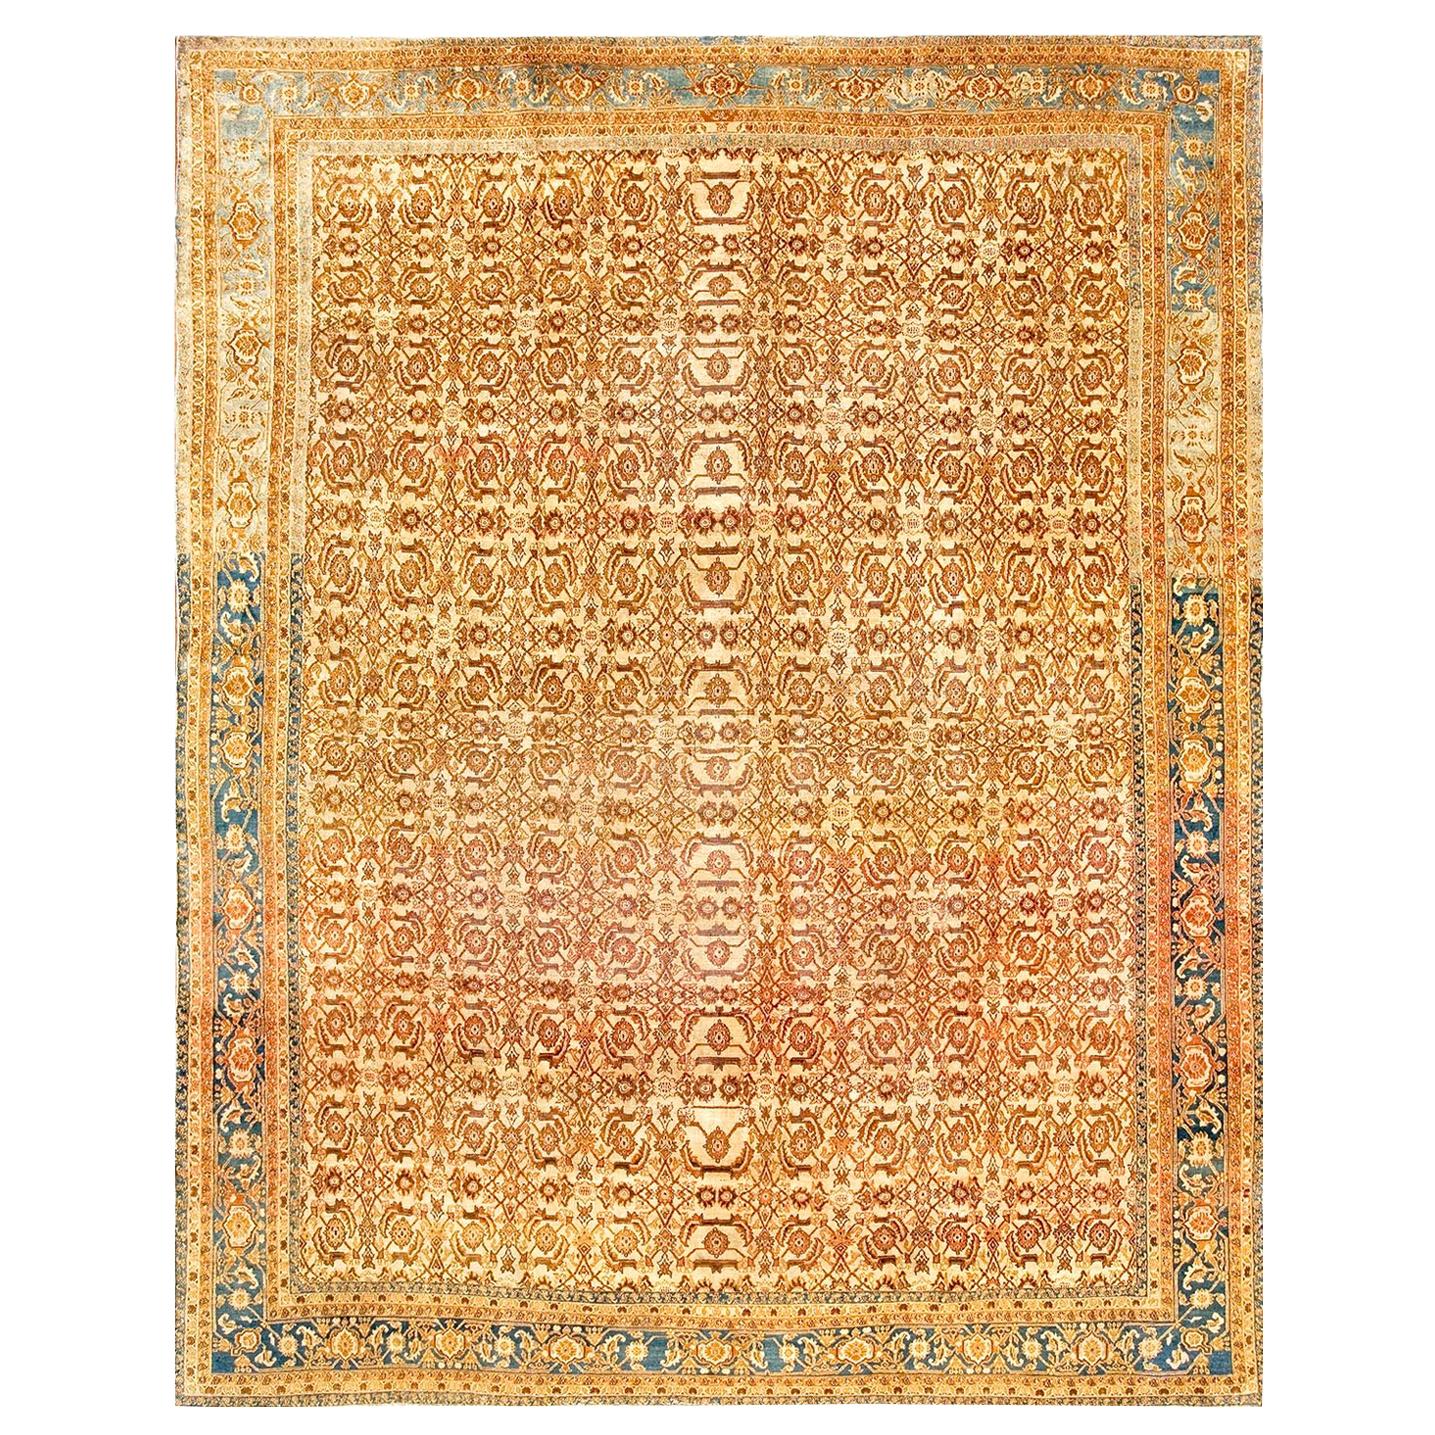 Early 20th Century N. Indian Agra Carpet ( 9' x 11'4" - 275 x 345 ) For Sale